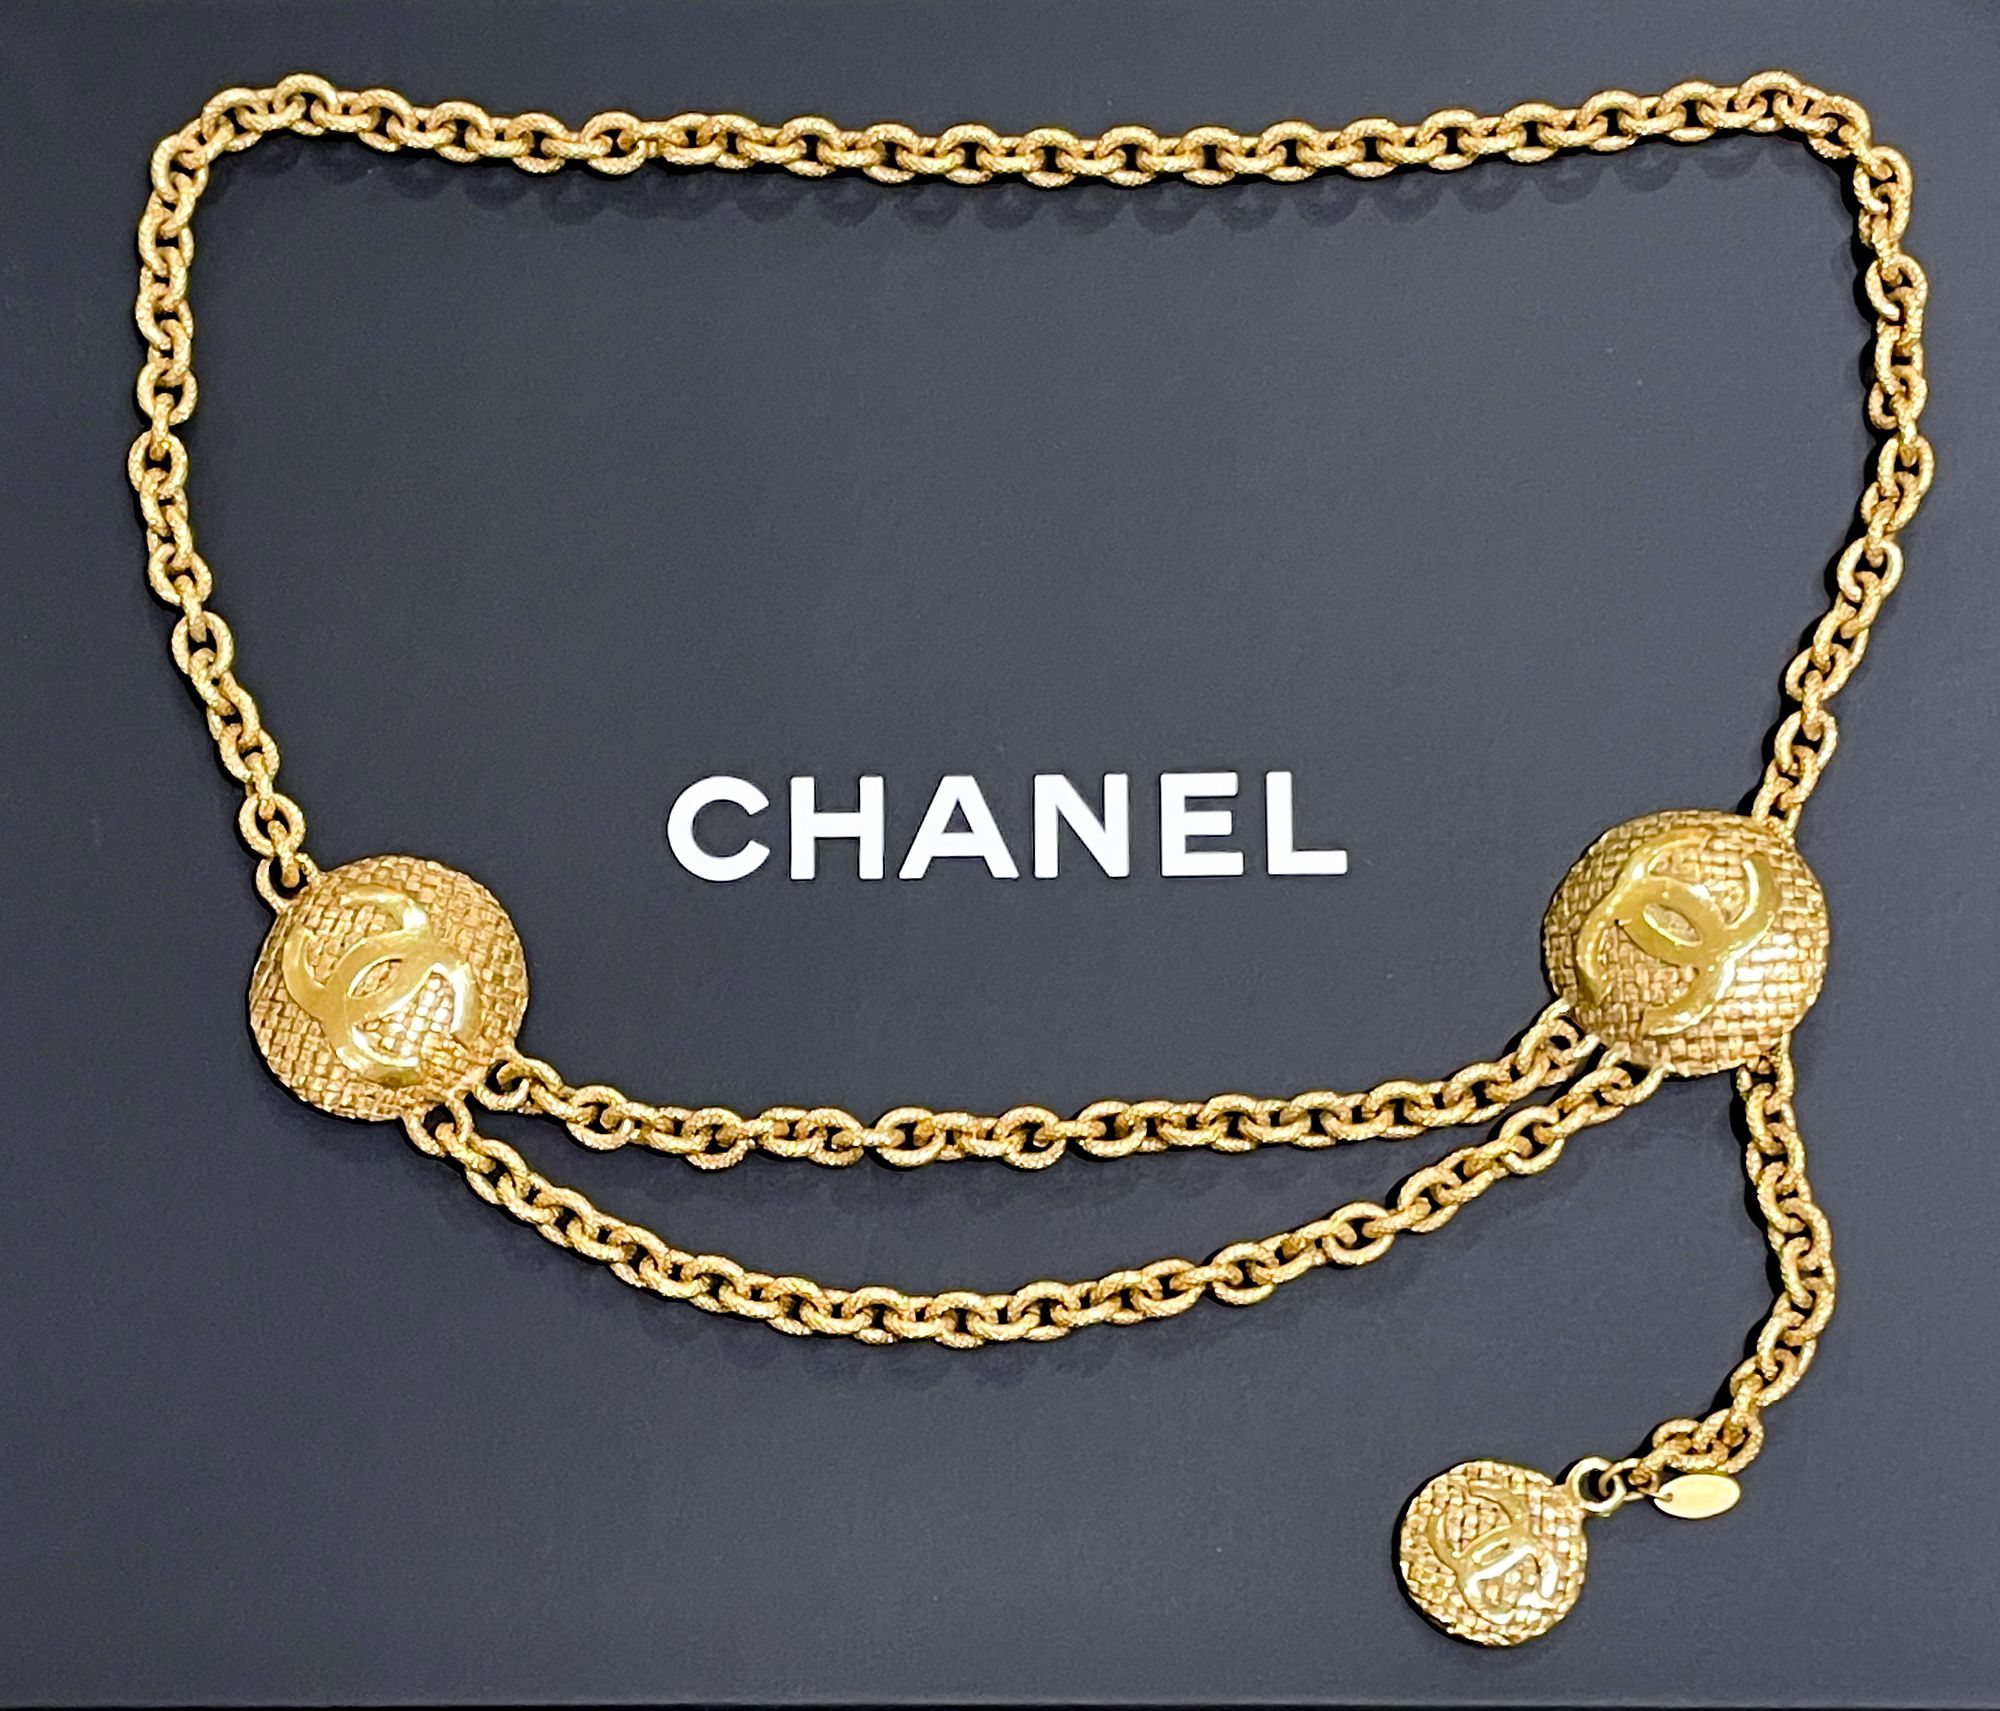 Vintage CC Chanel Gold Chain Belt Season 29 for sale at auction from 18th  August to 17th September